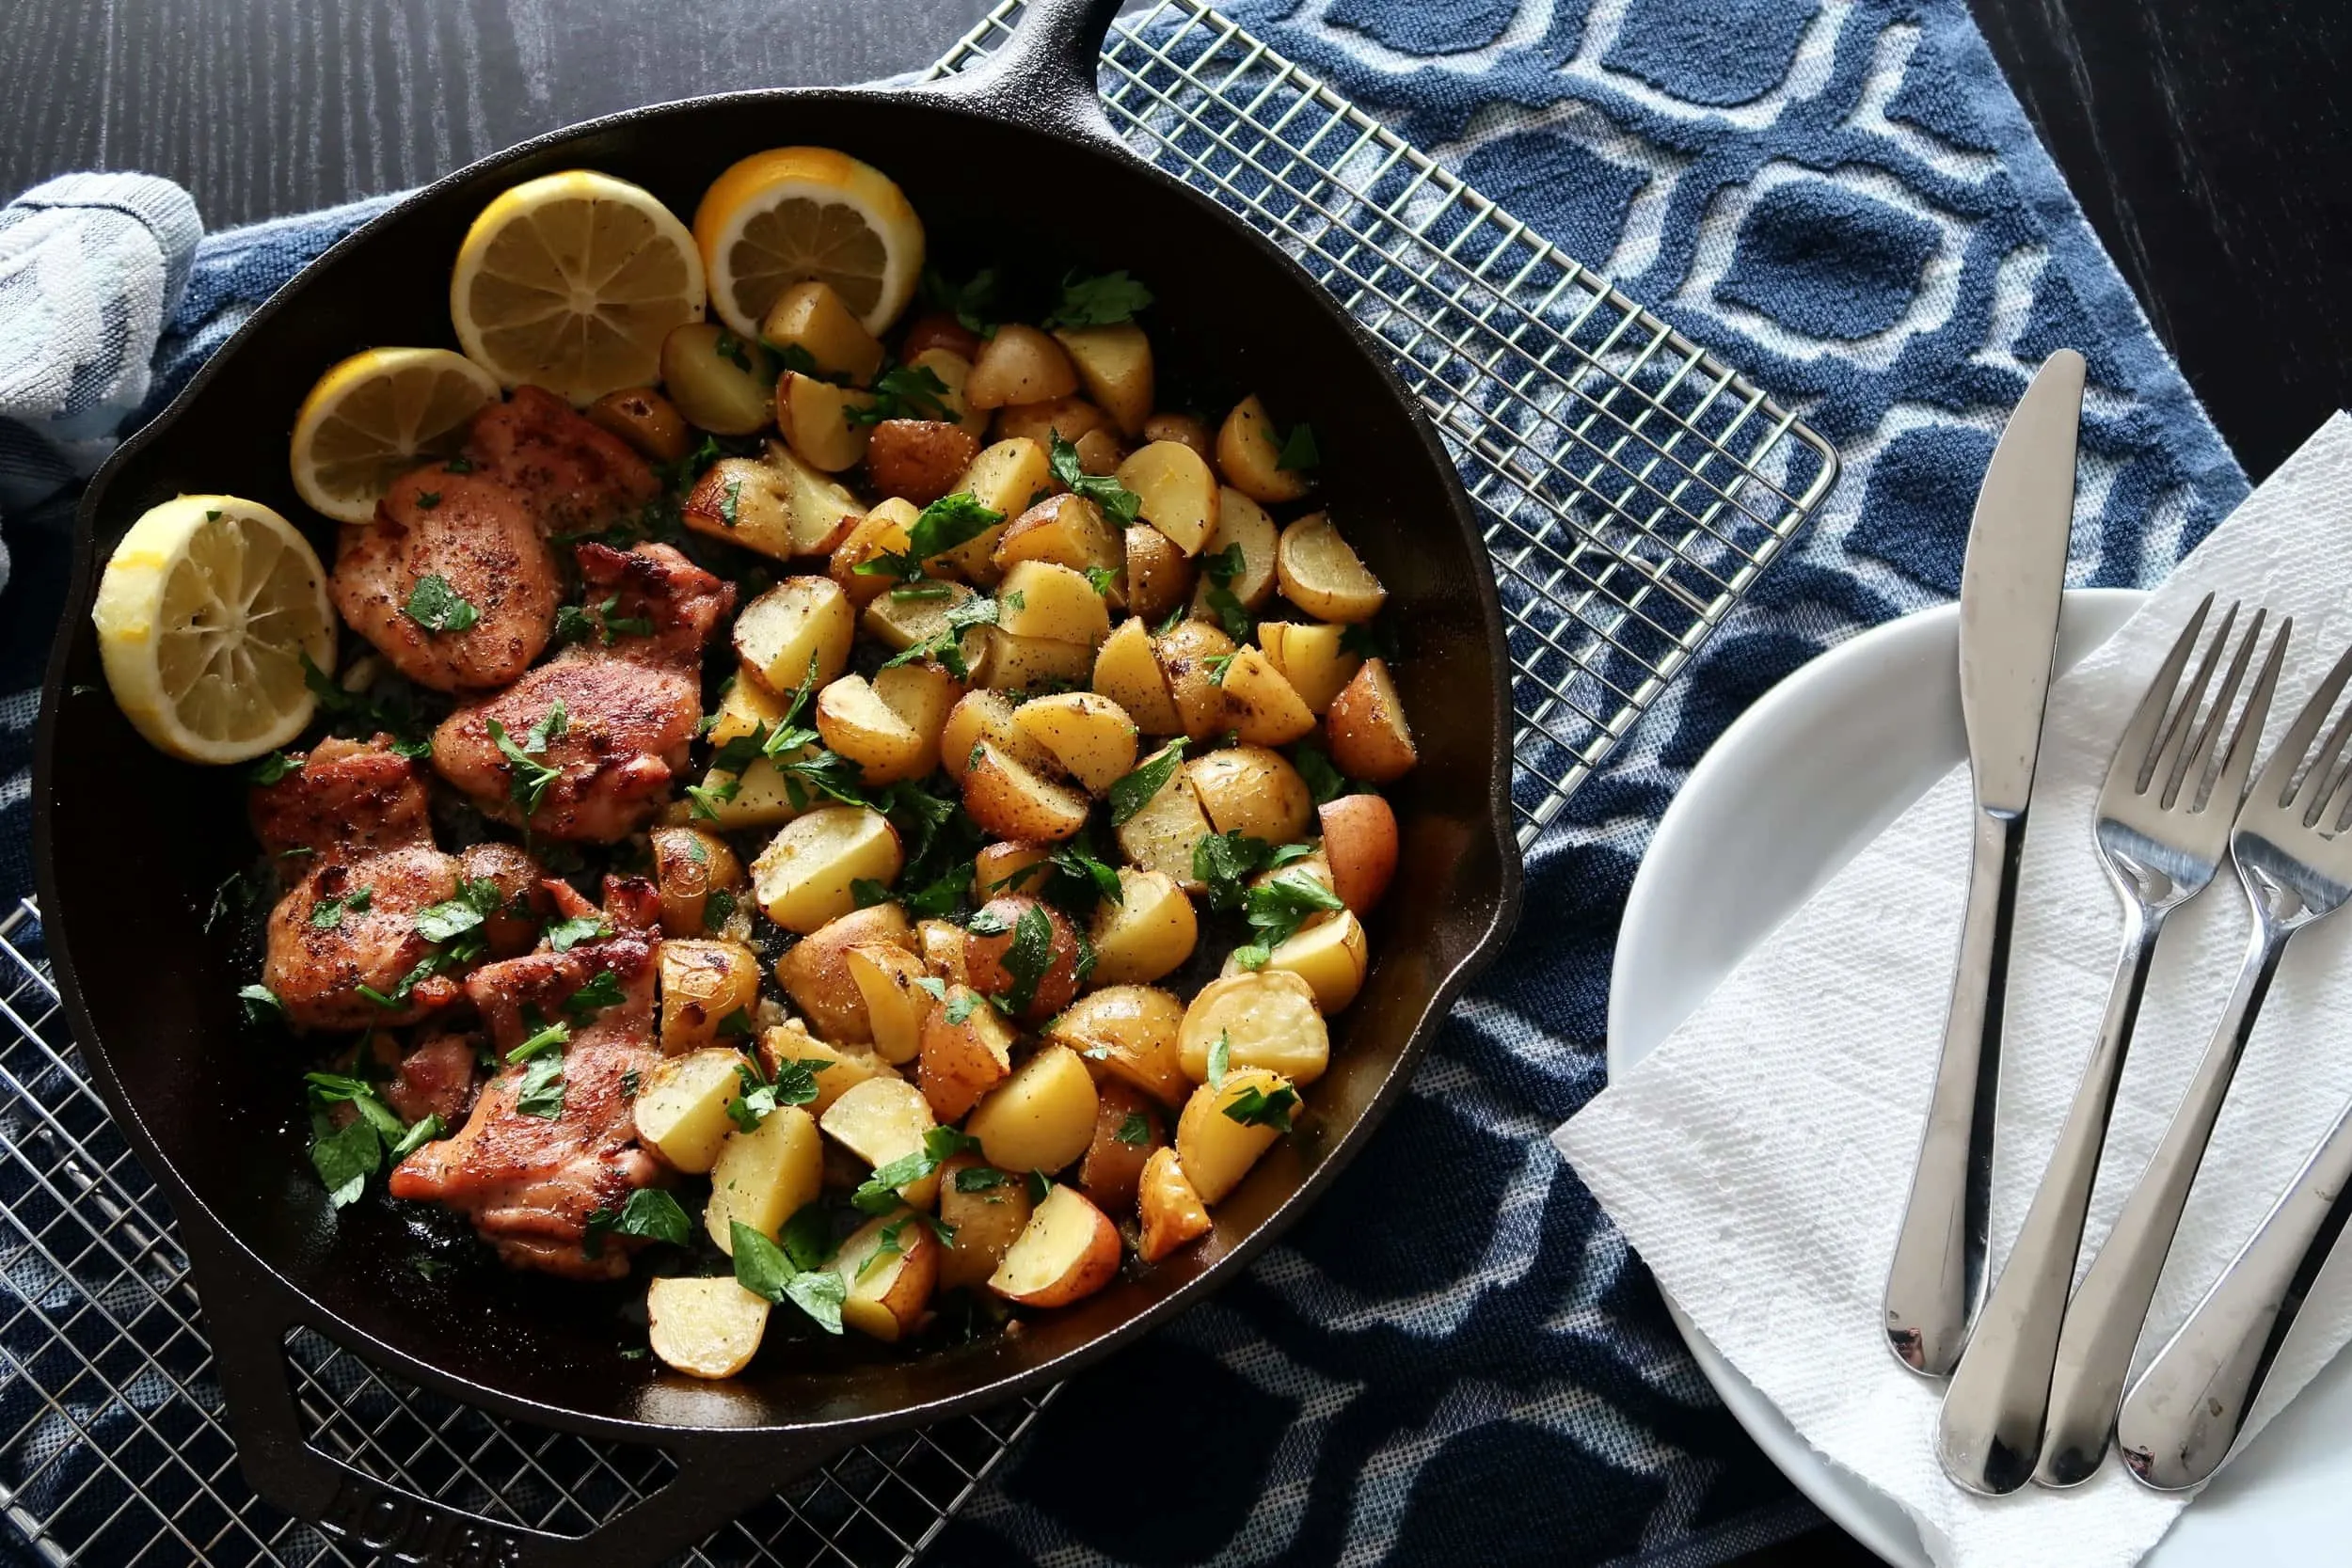 Lemon Garlic Chicken with Baby Potatoes with plates and utensils nearby.